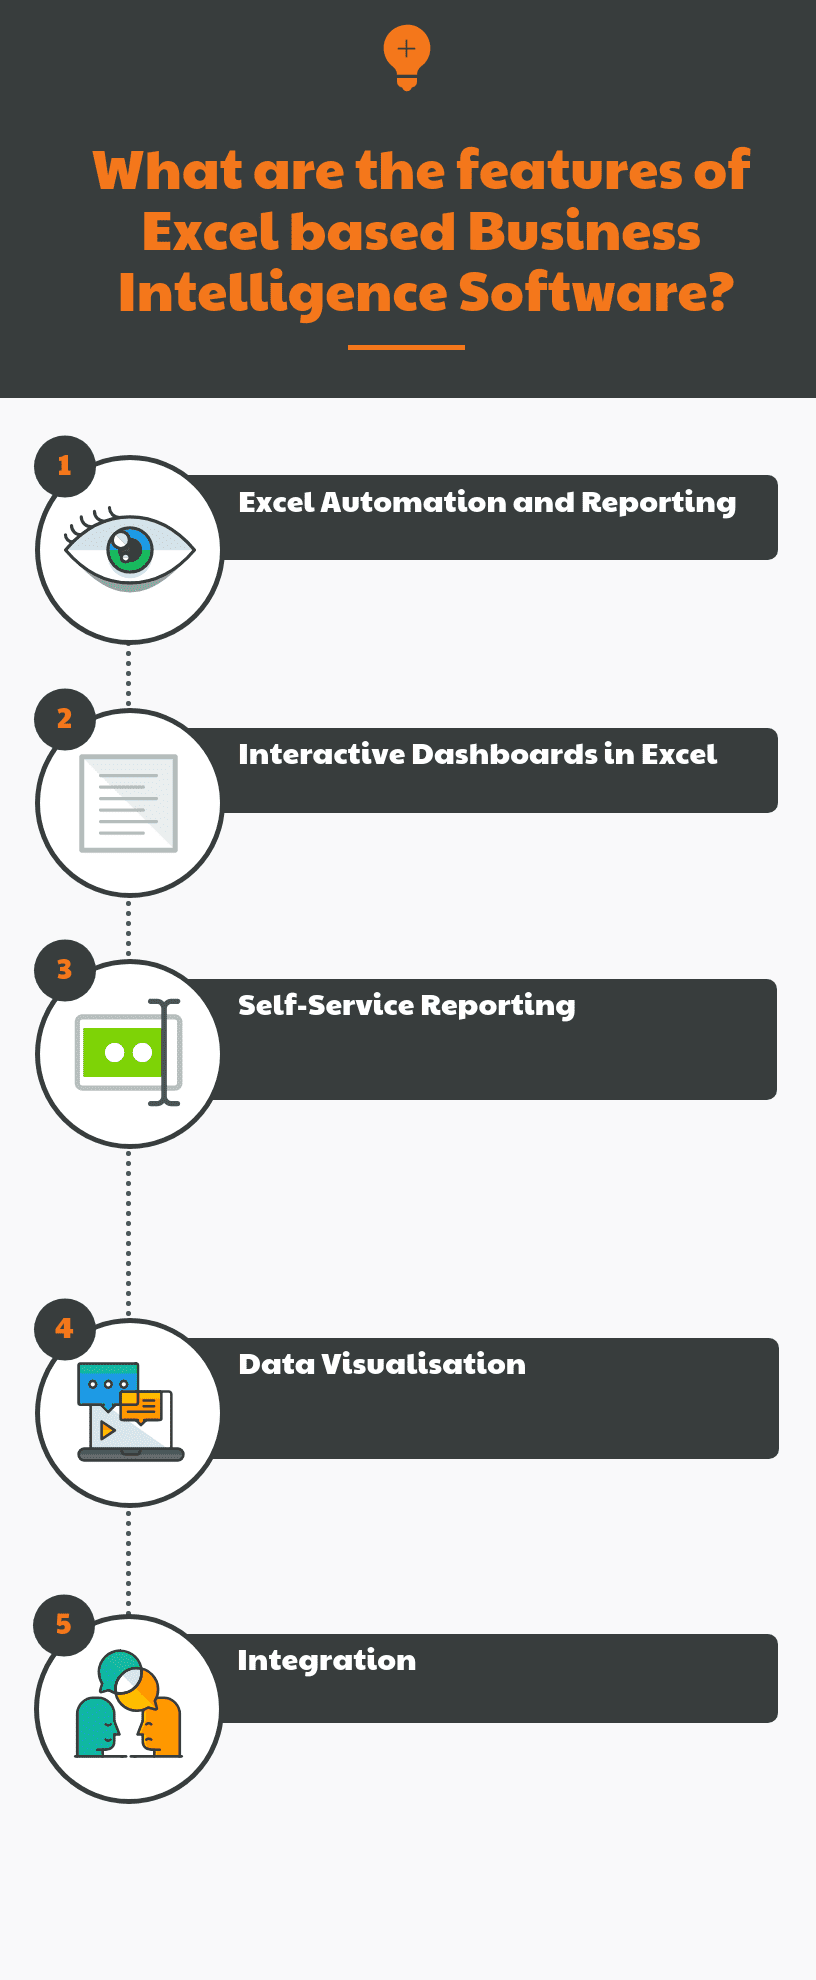 Top 11 Excel based Business Intelligence Software in 2020 – Reviews, Features, Pricing, Comparison